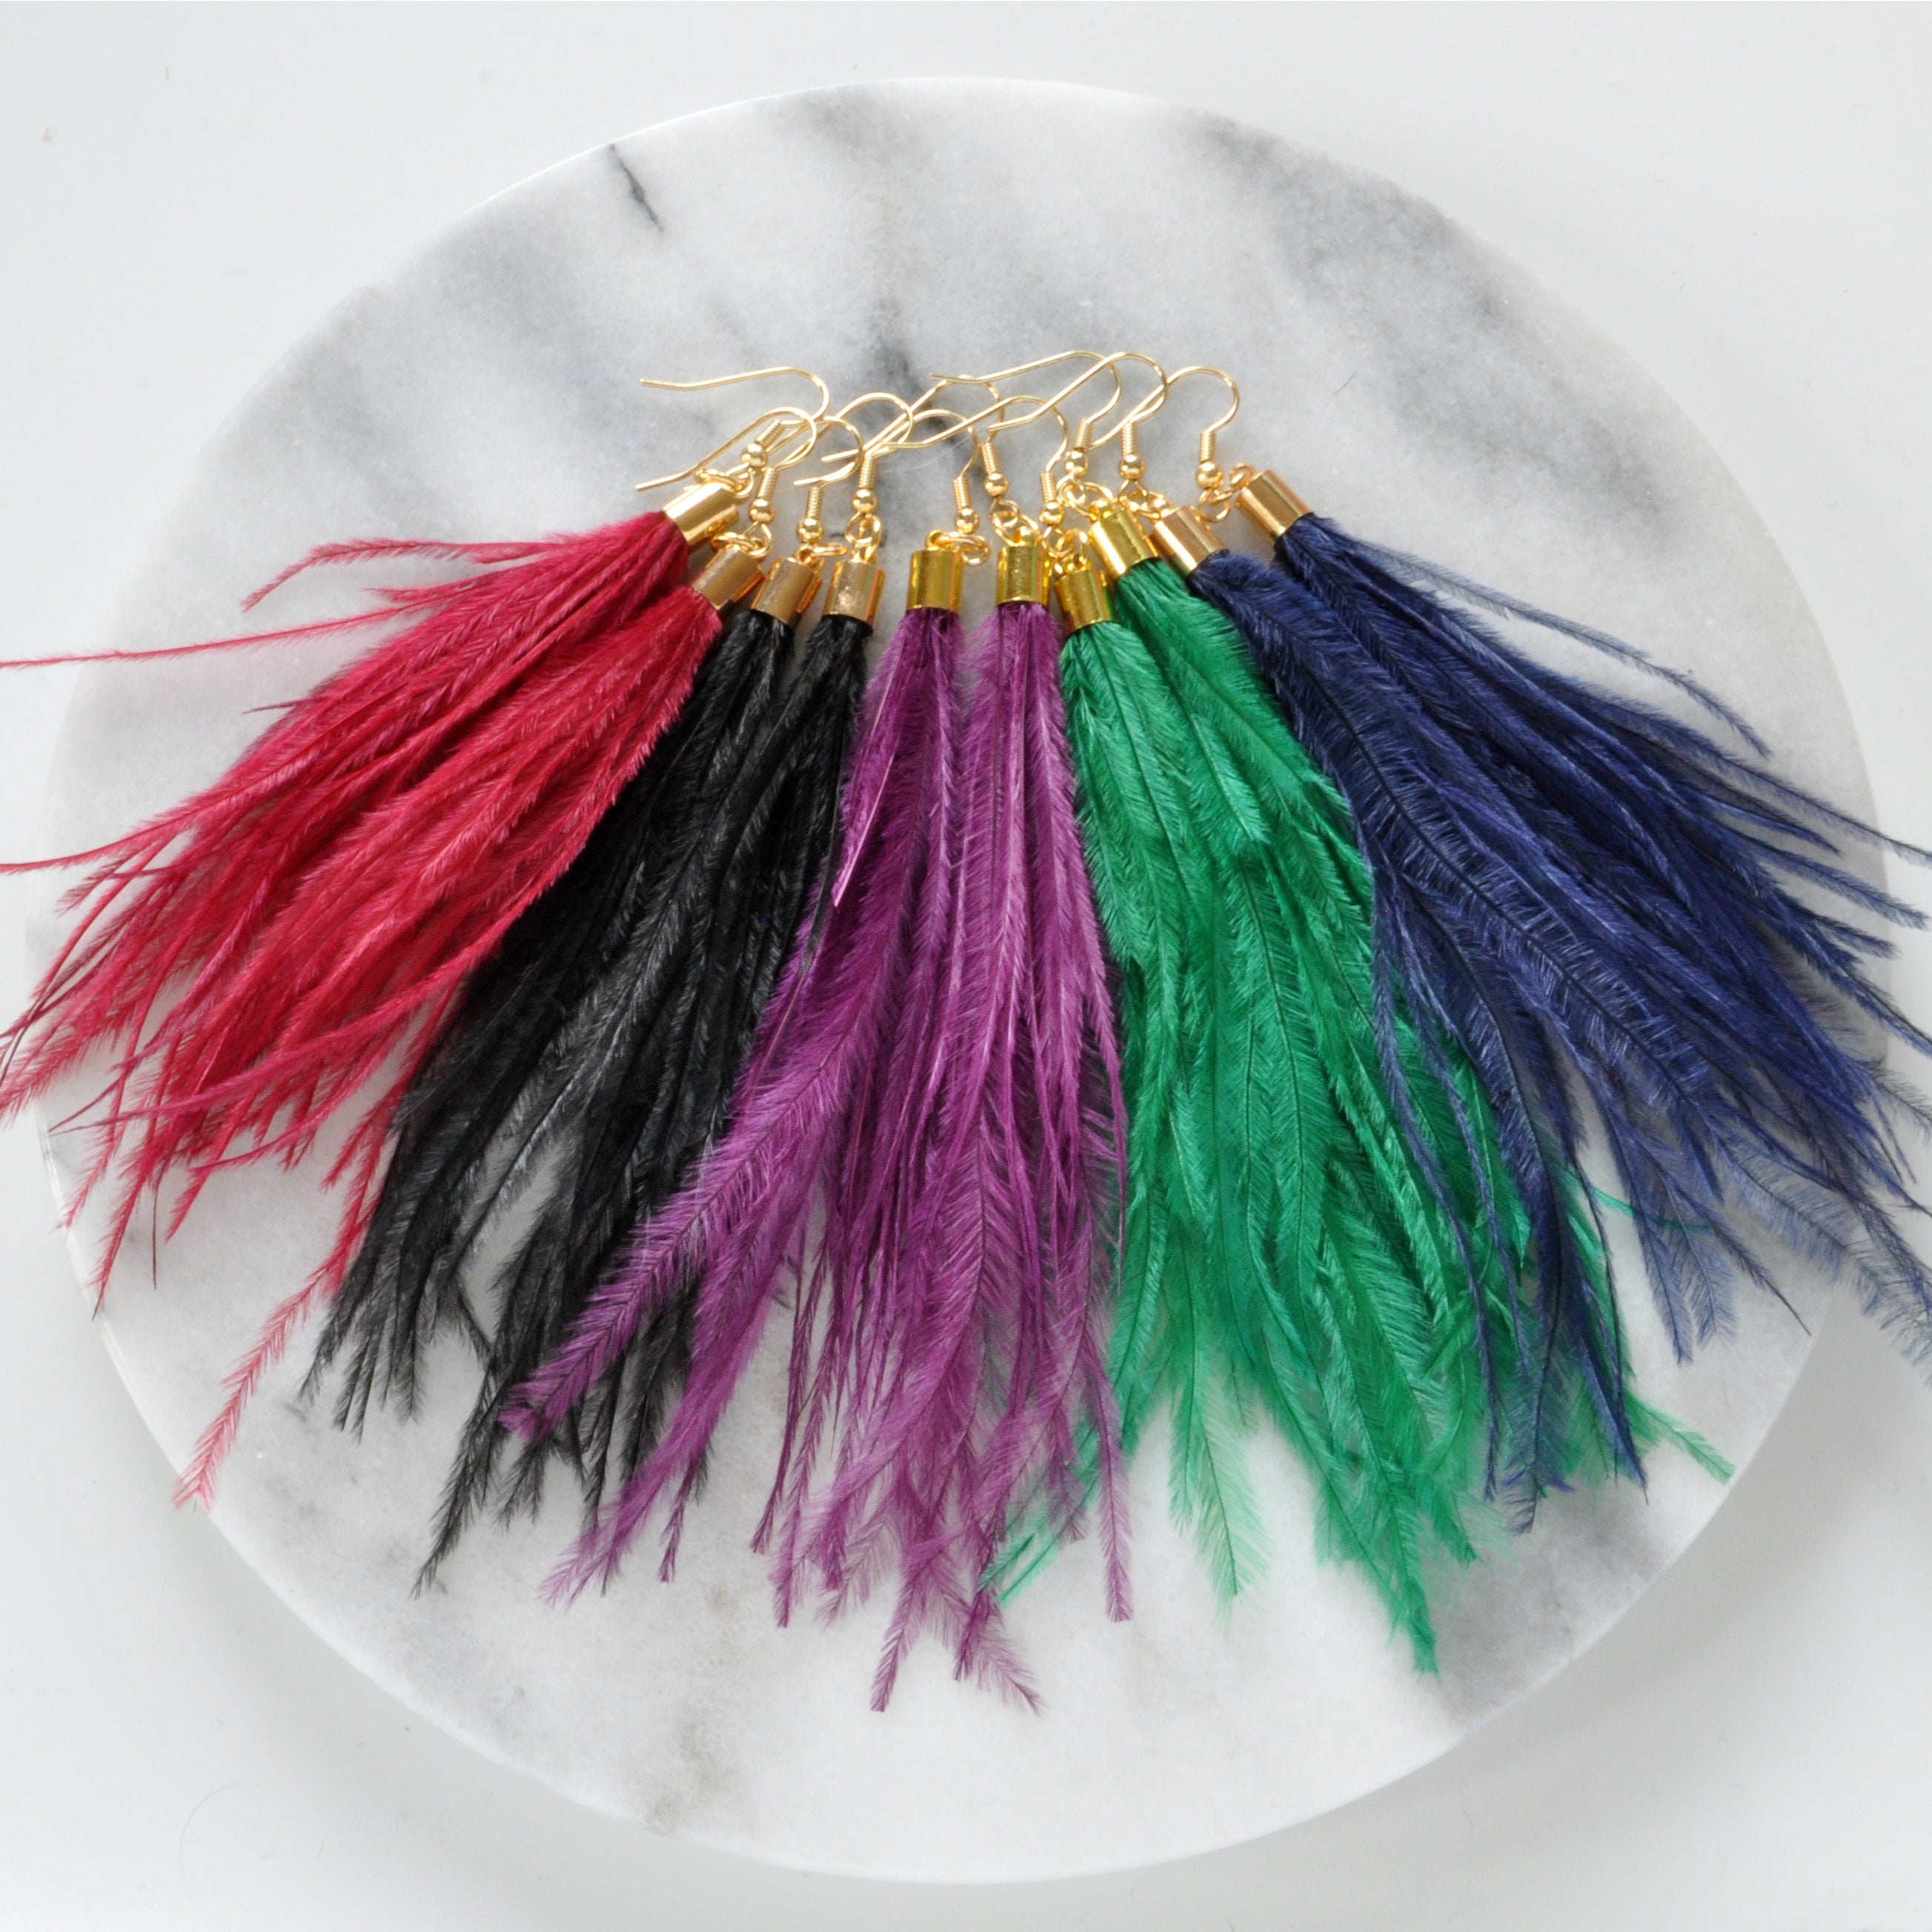 Libby & Smee Green Feather Earrings with Ostrich Feathers and Gold Caps and other Libby & Smee ostrich feather earrings